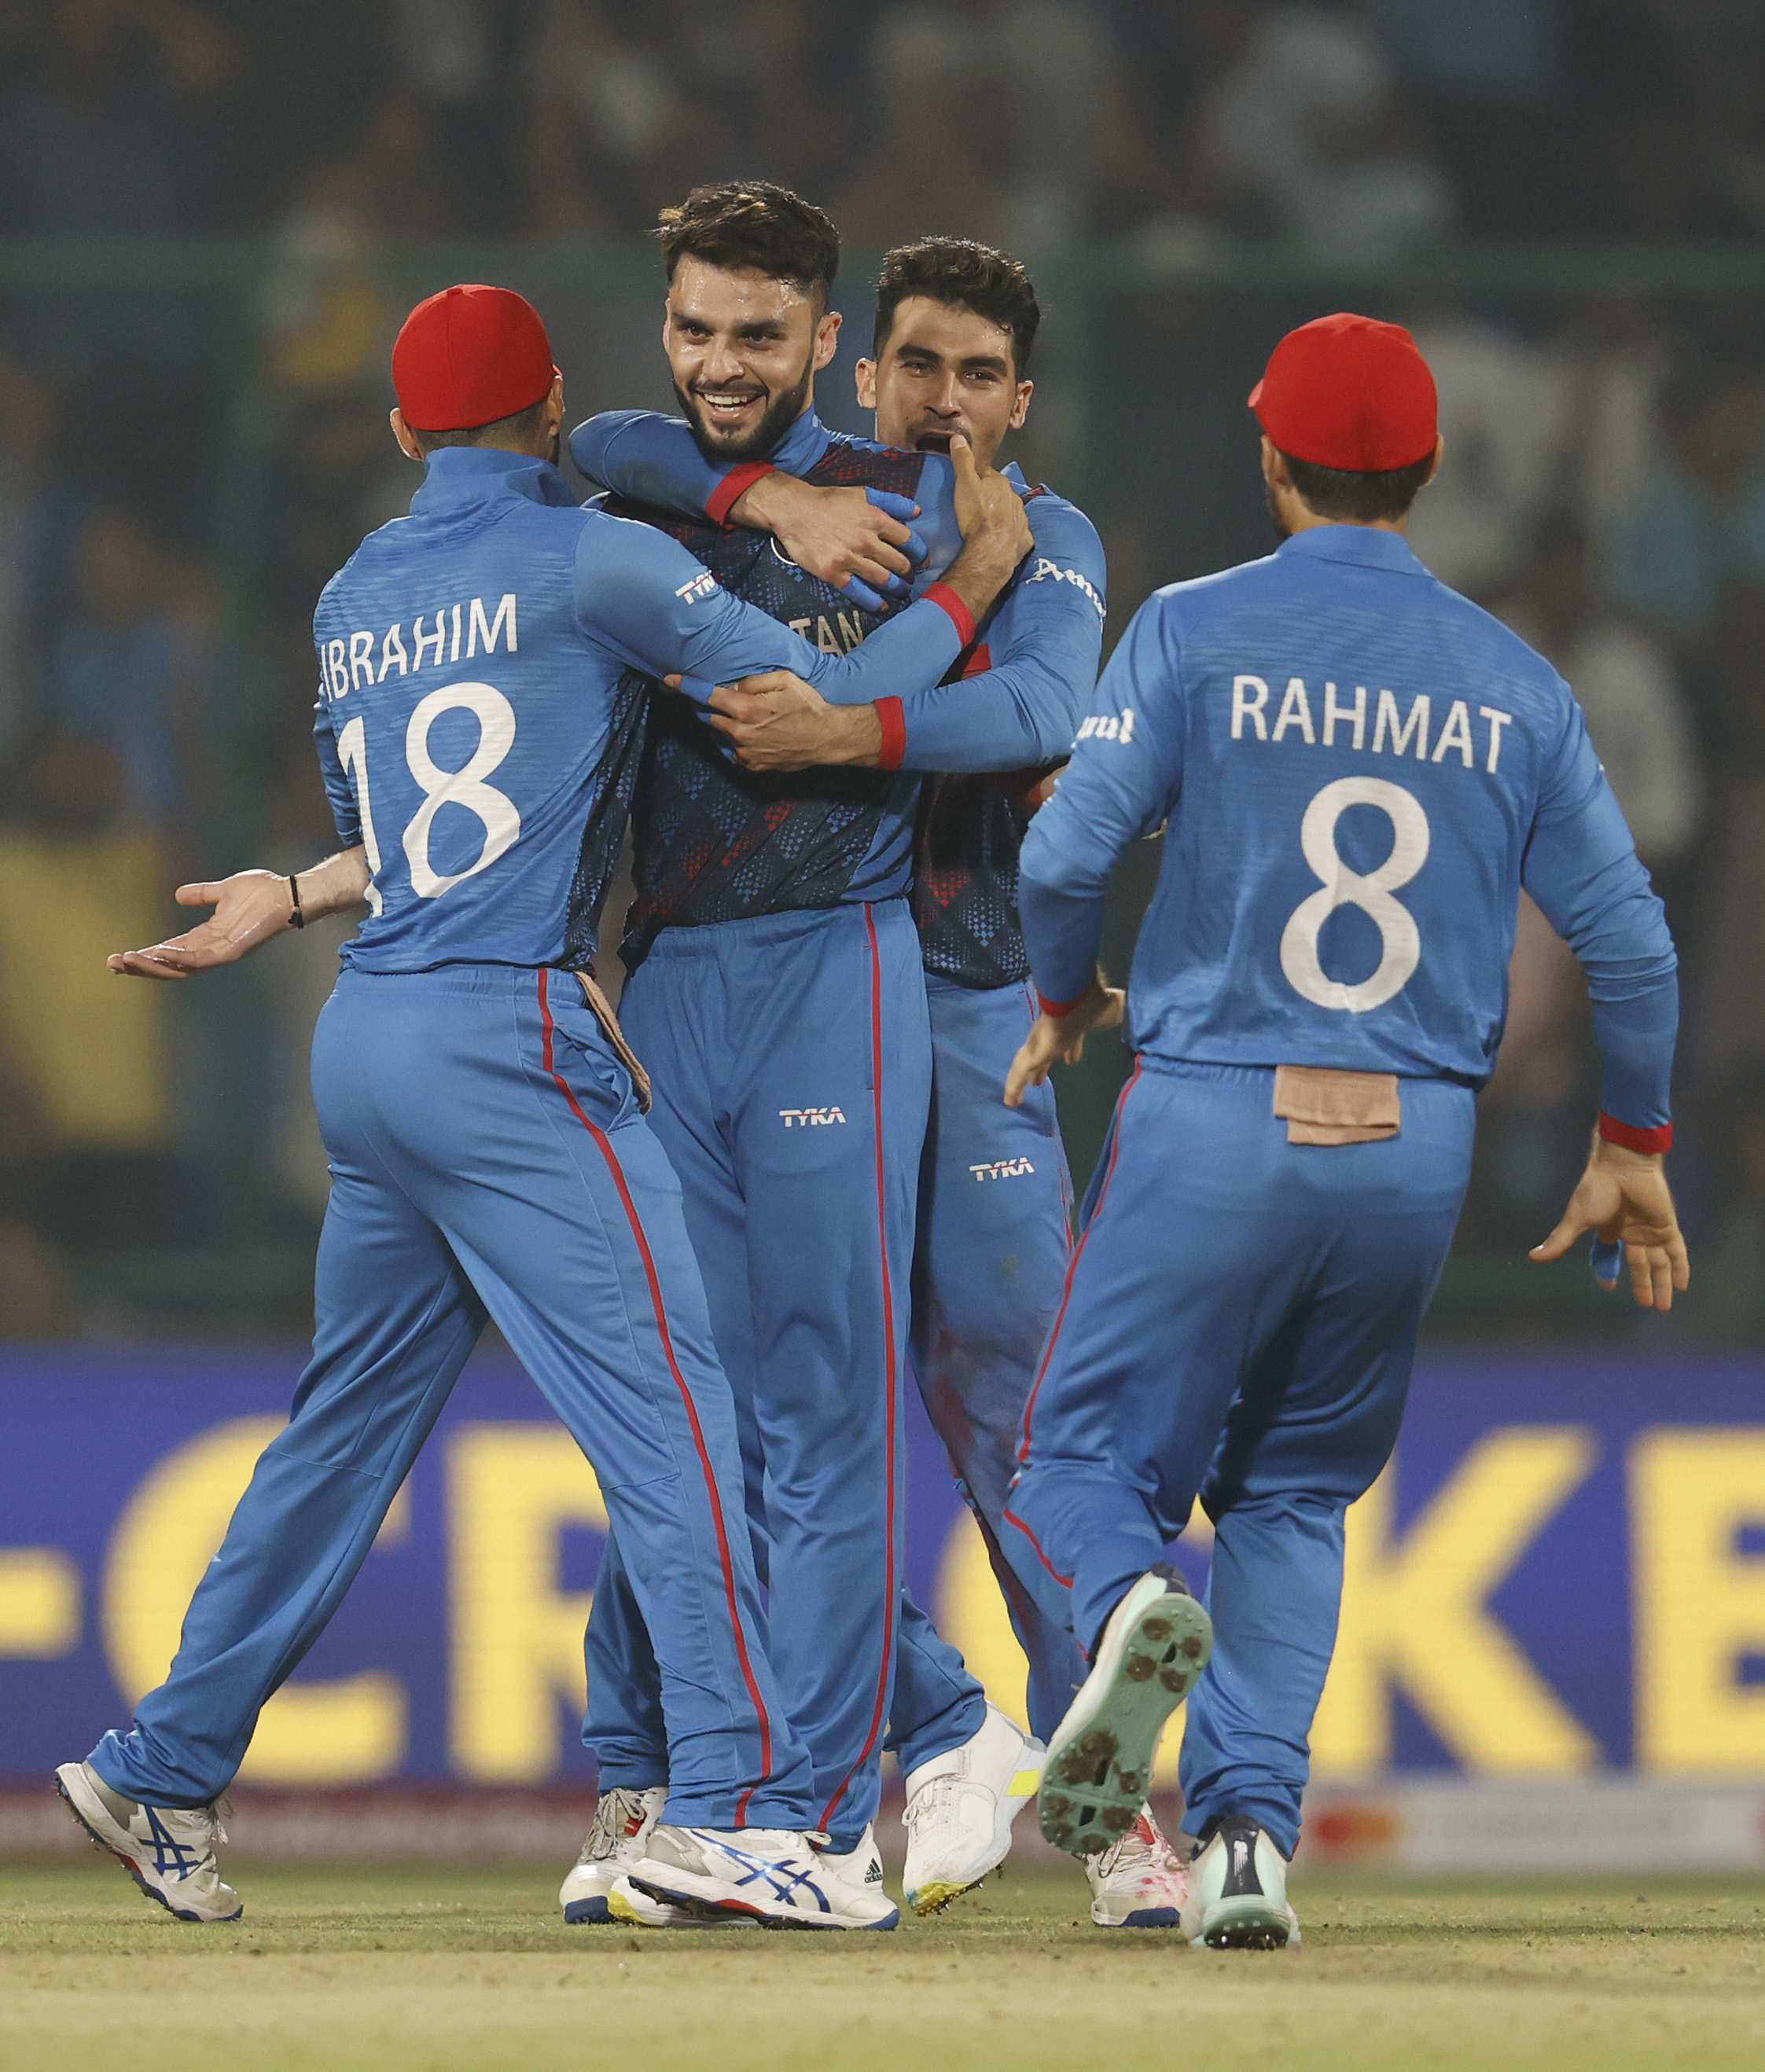 AFG vs ENG | Naveen-ul-Haq's absolute jaffa leaves Jos Buttler's wickets in a mess